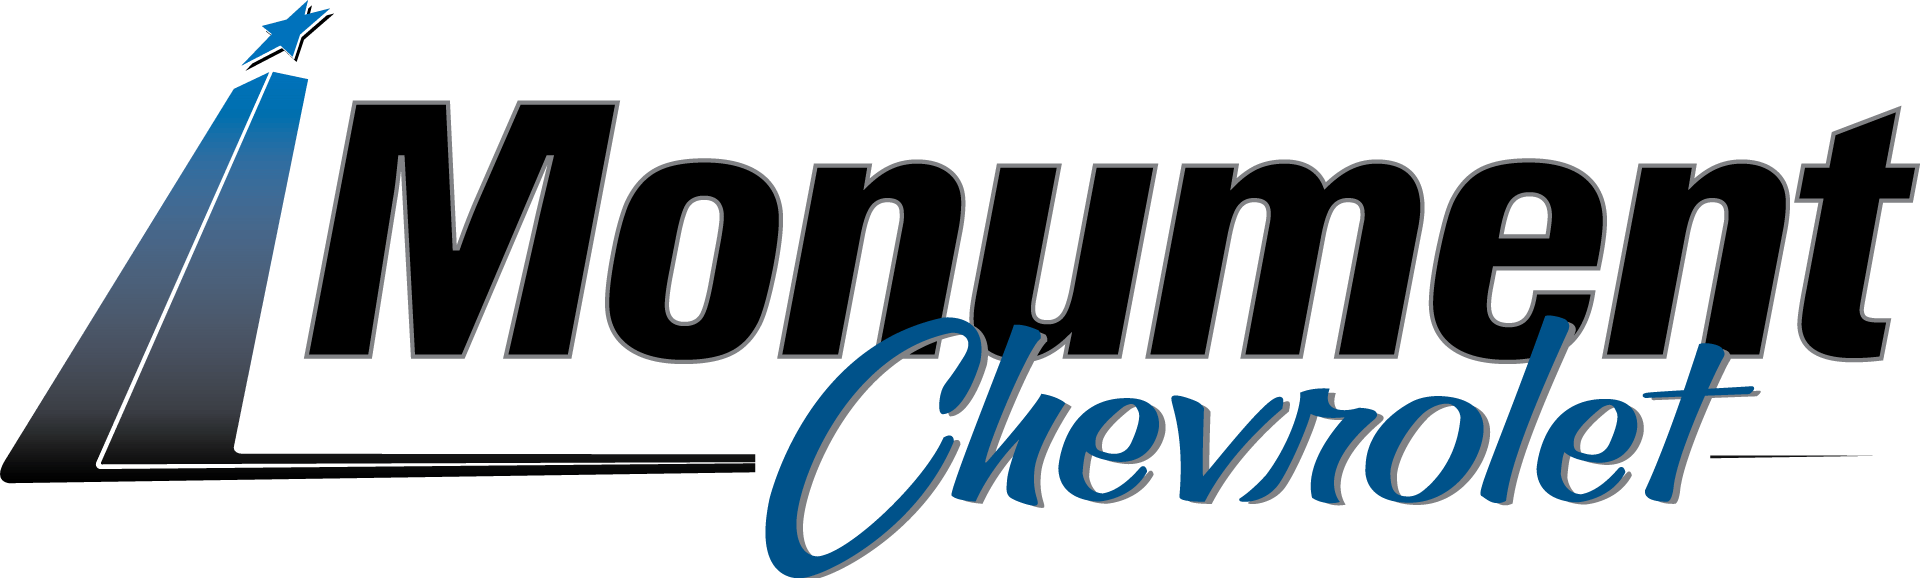 Monument-Chevy-Logo-Tranparency-PNG